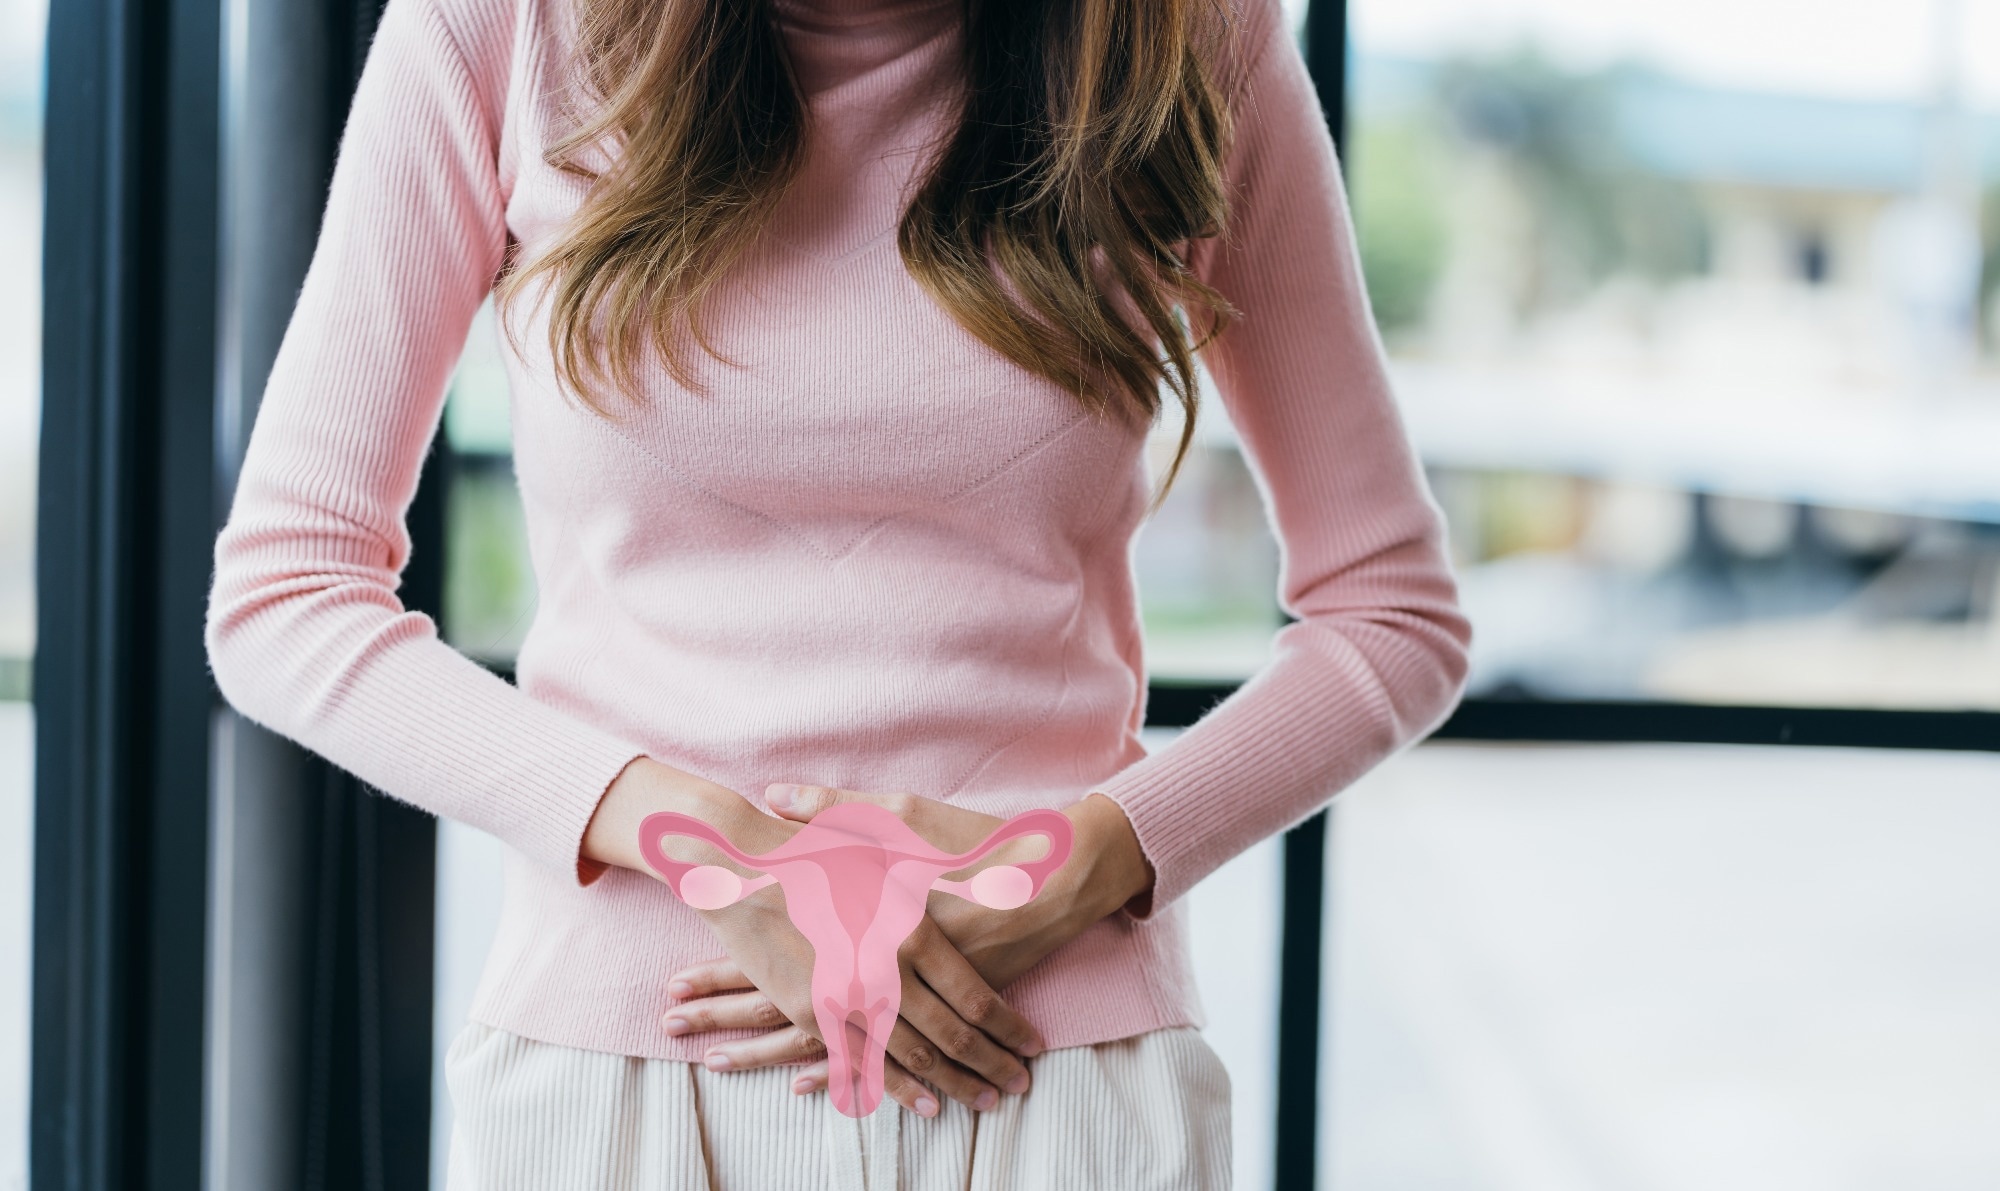 Study: The Current and Emerging Role of Statins in the Treatment of PCOS: The Evidence to Date. Image Credit: MMD Creative/Shutterstock.com